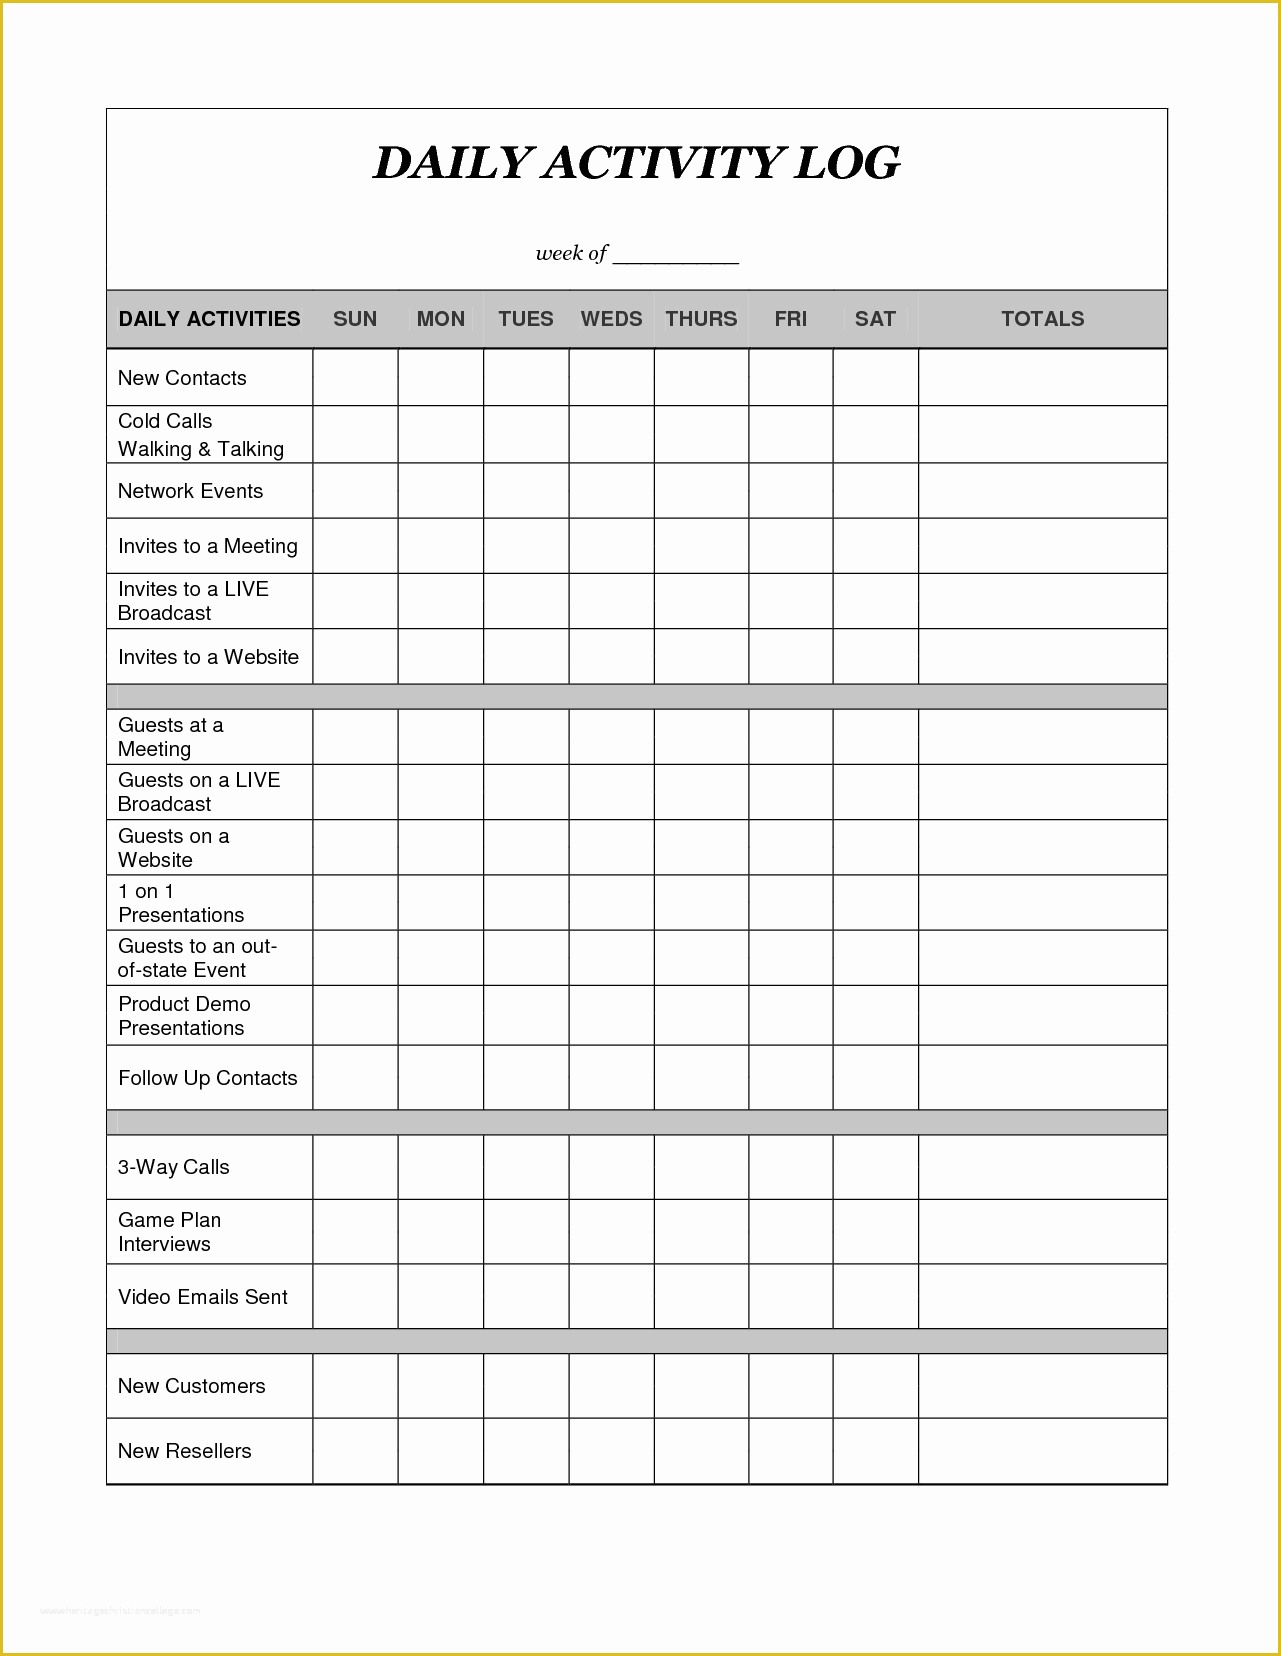 Activity Log Template Excel Free Download Of 8 Daily Activity Log